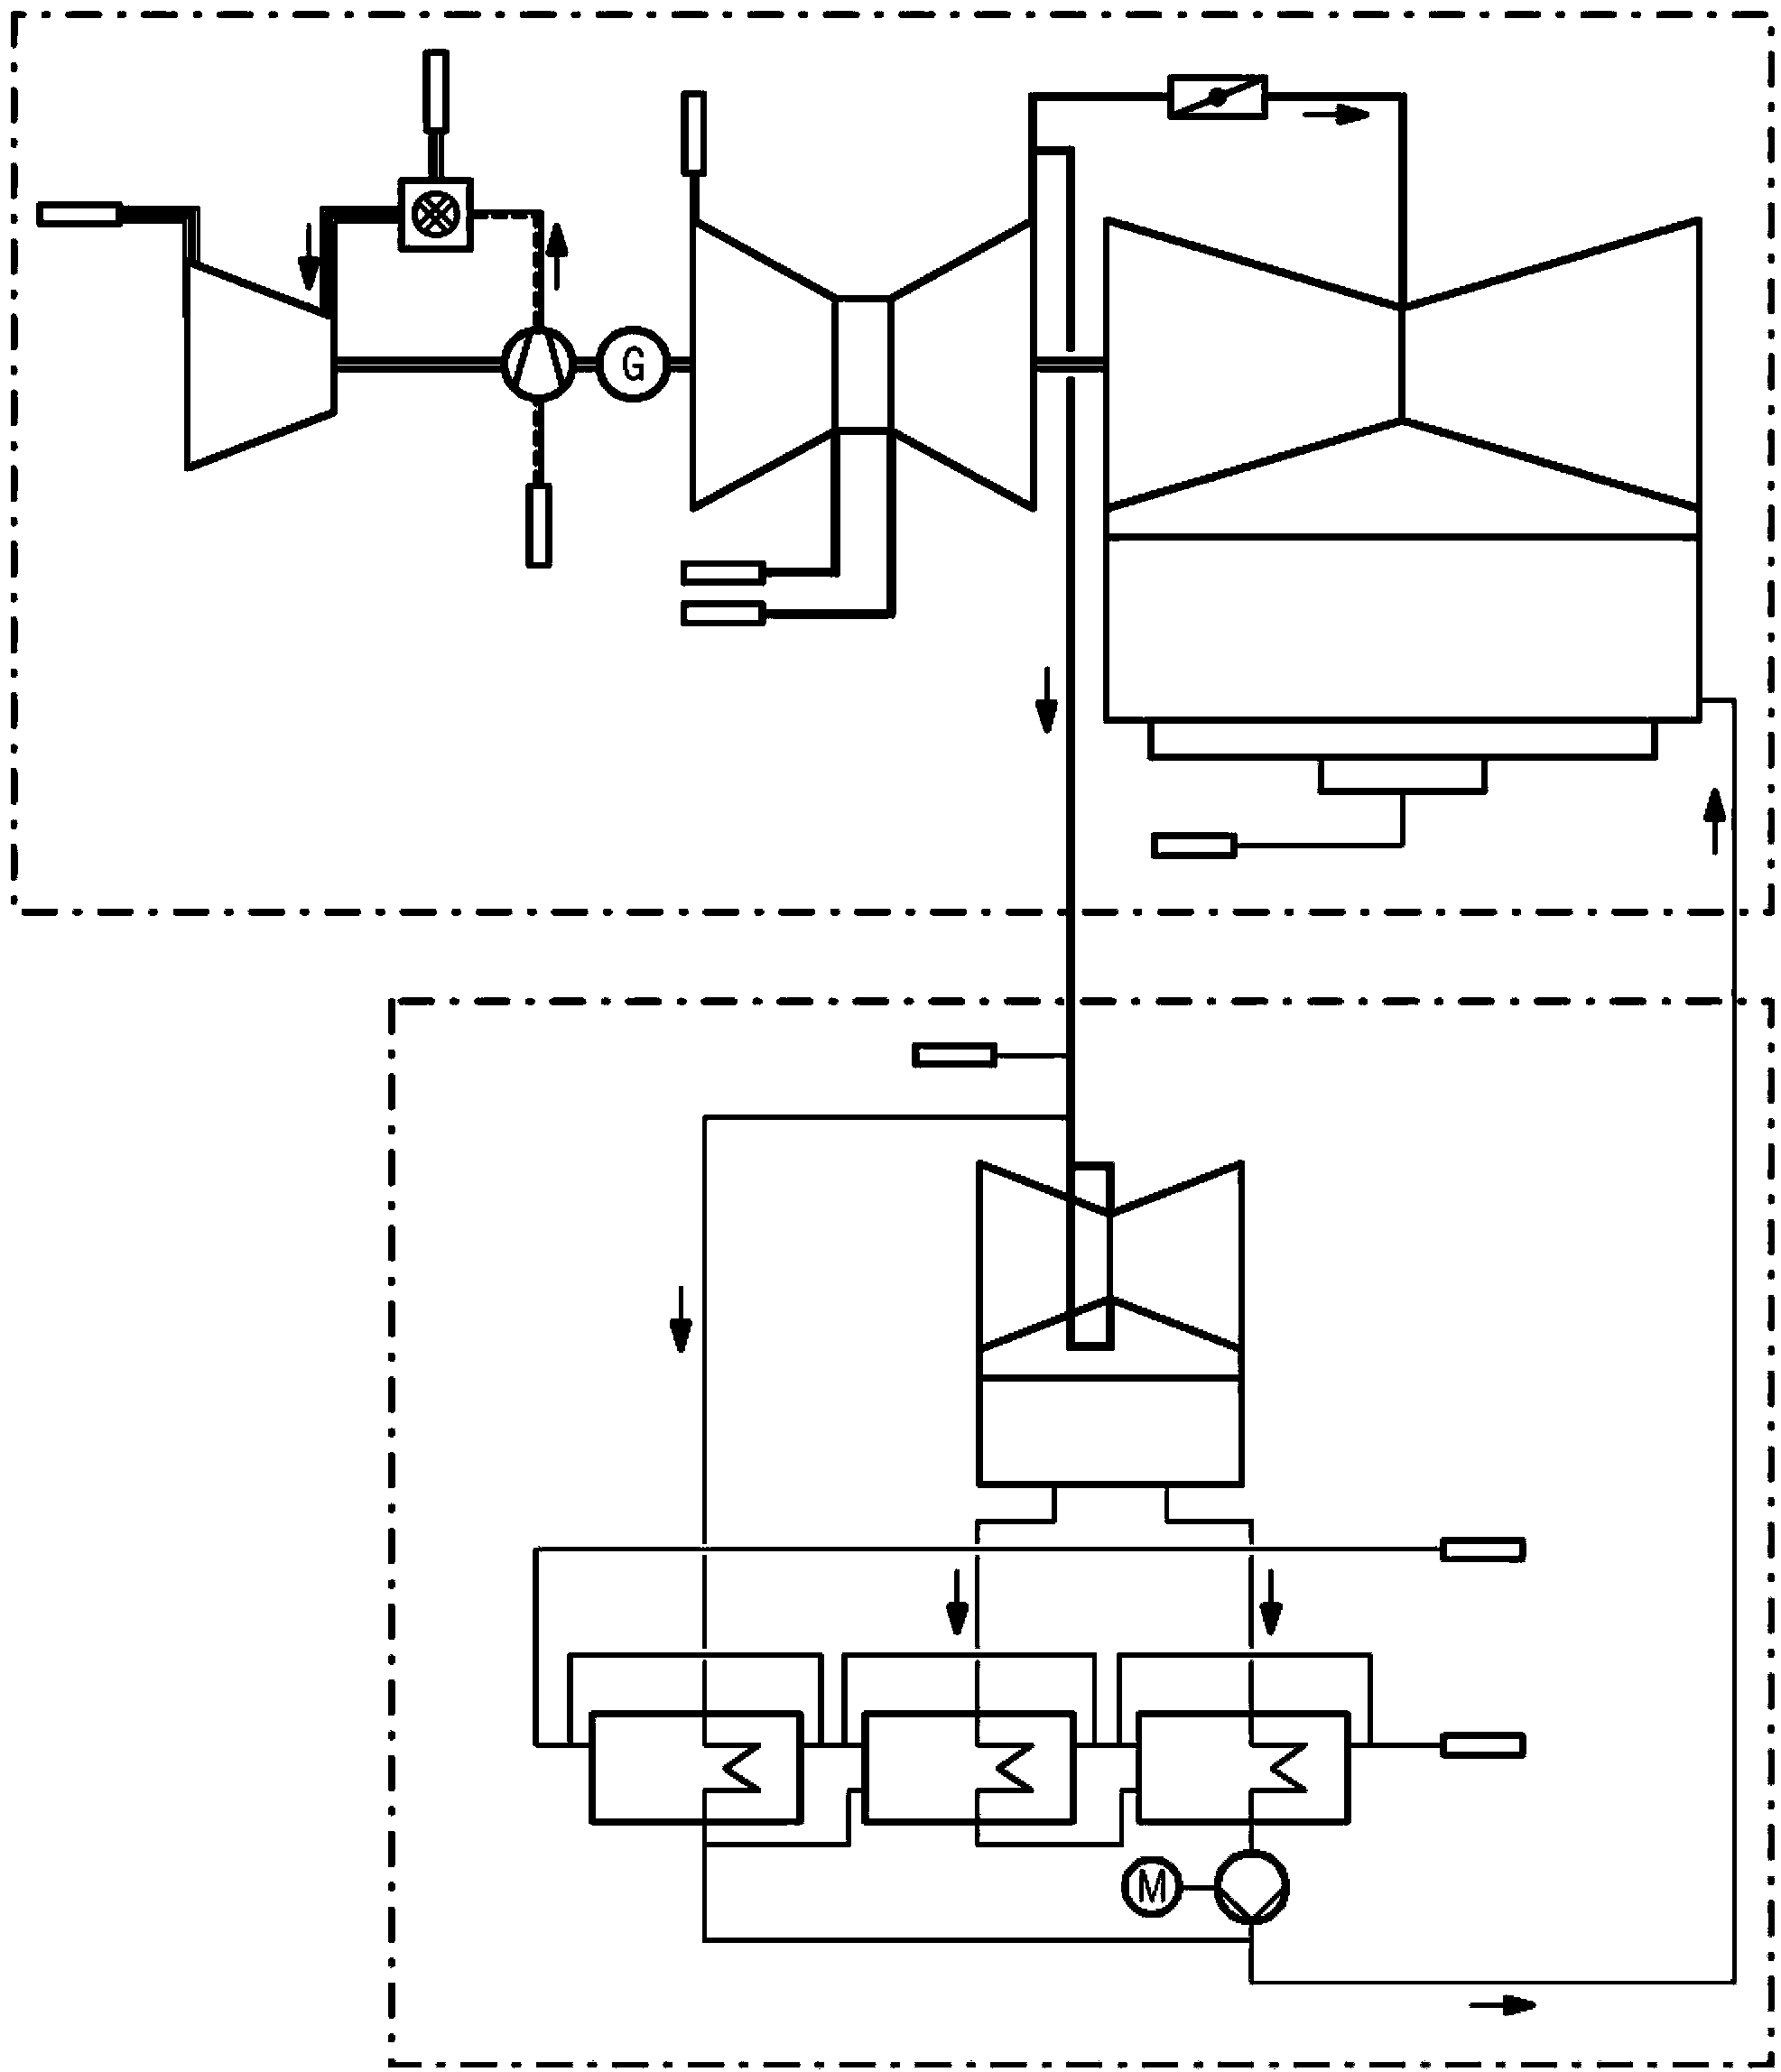 Retrofitting a heating steam extraction facility in a fossil-fired power plant